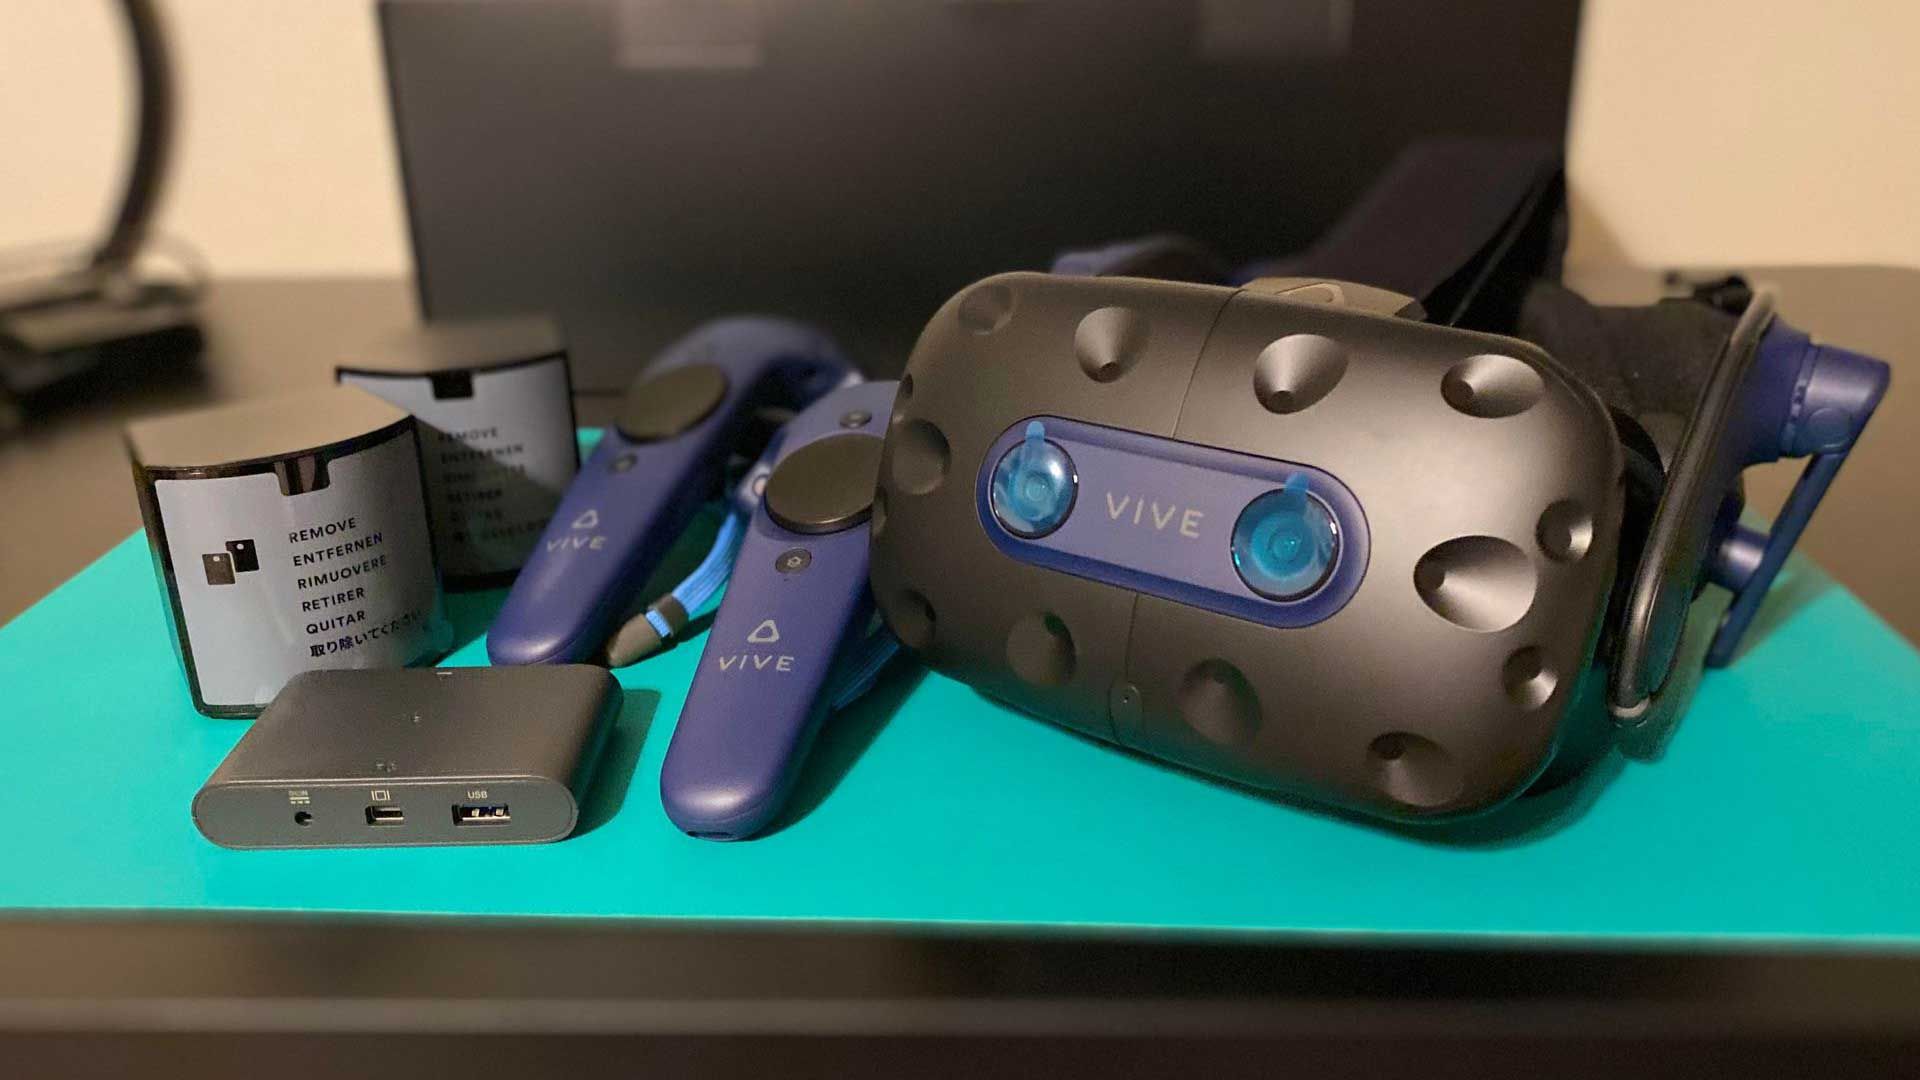 Vive Pro 2 headset with Vive controllers, link box, and Steam VR base stations 2.0